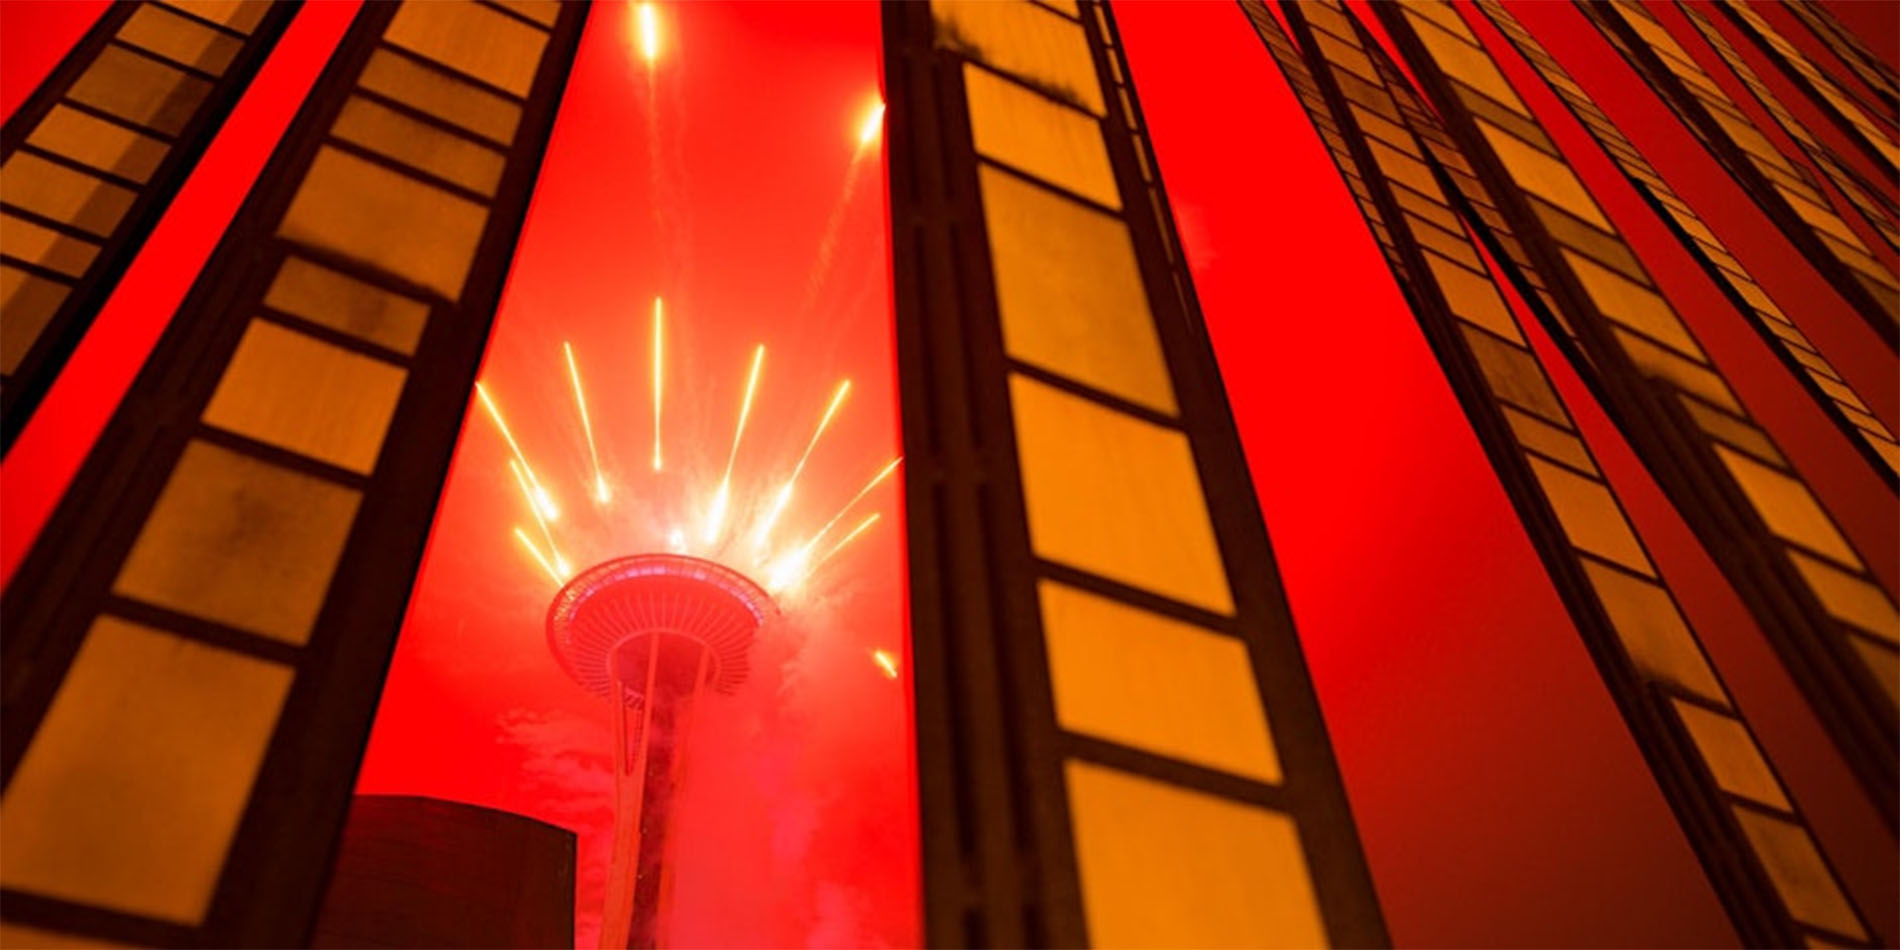 red image of space needle and buildings